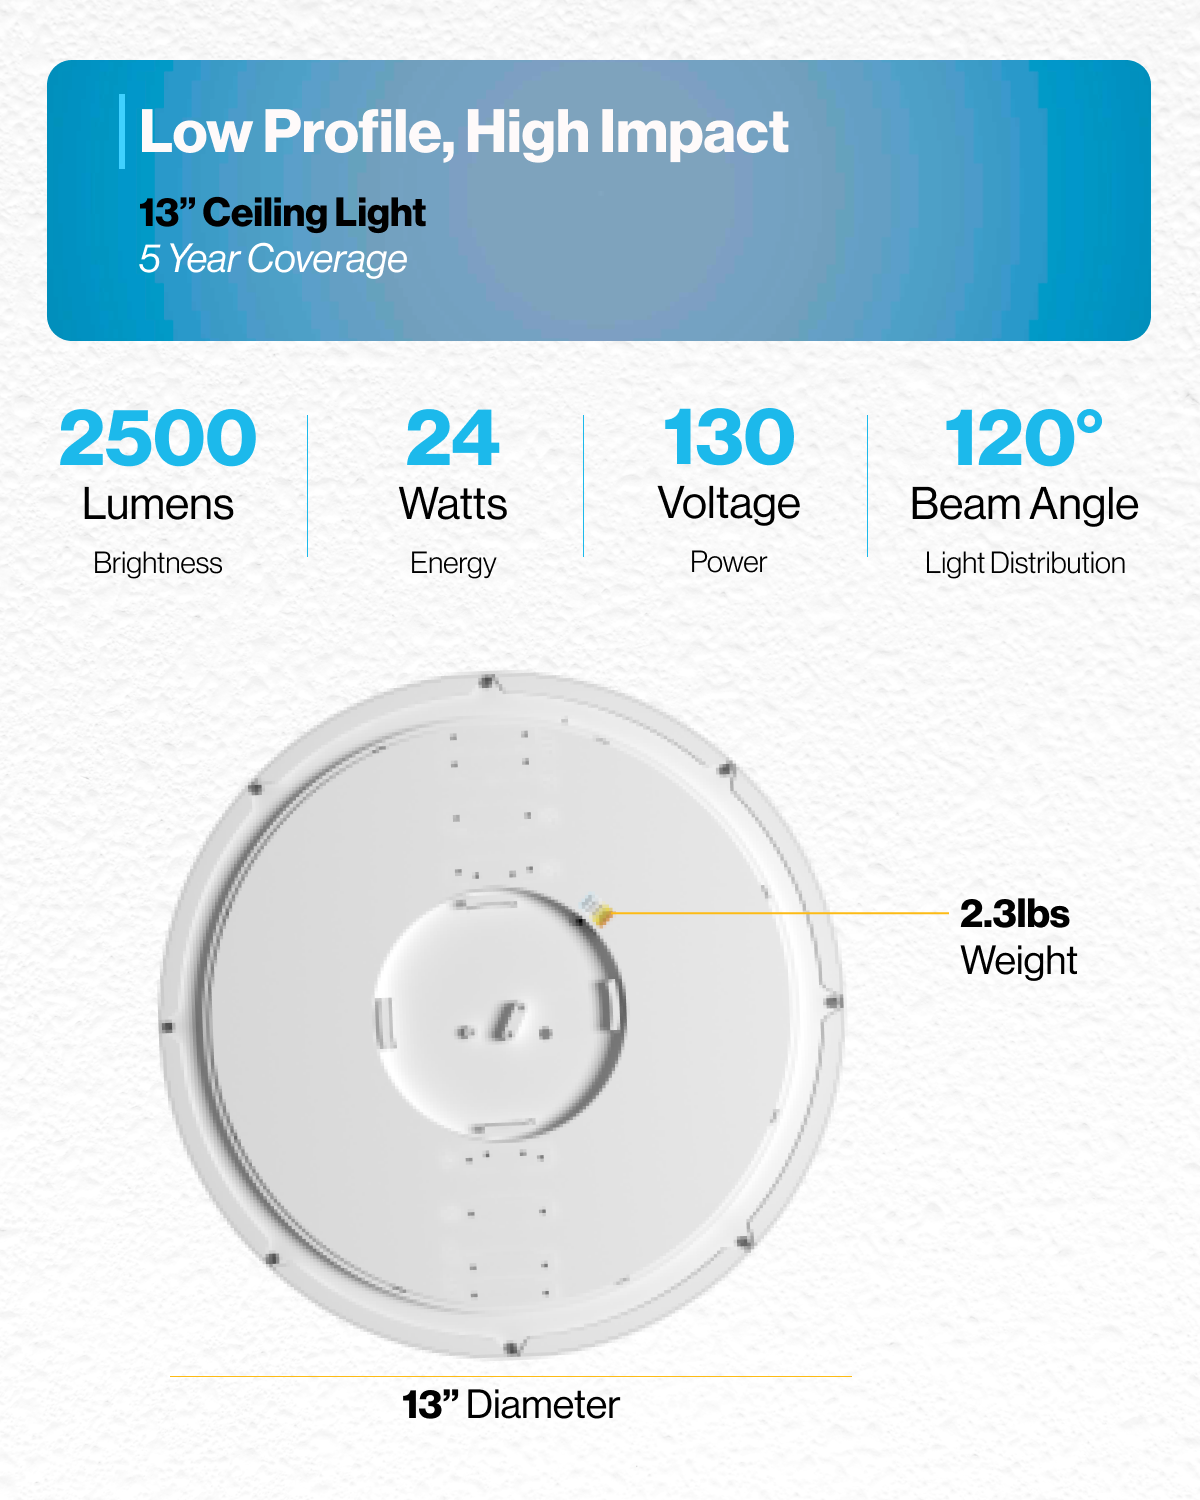 Sunco Lighting 13" Selectable White Ceiling Light Specifications 2500 Lumens 24 Watts 130 Voltage 120 Beam Angle